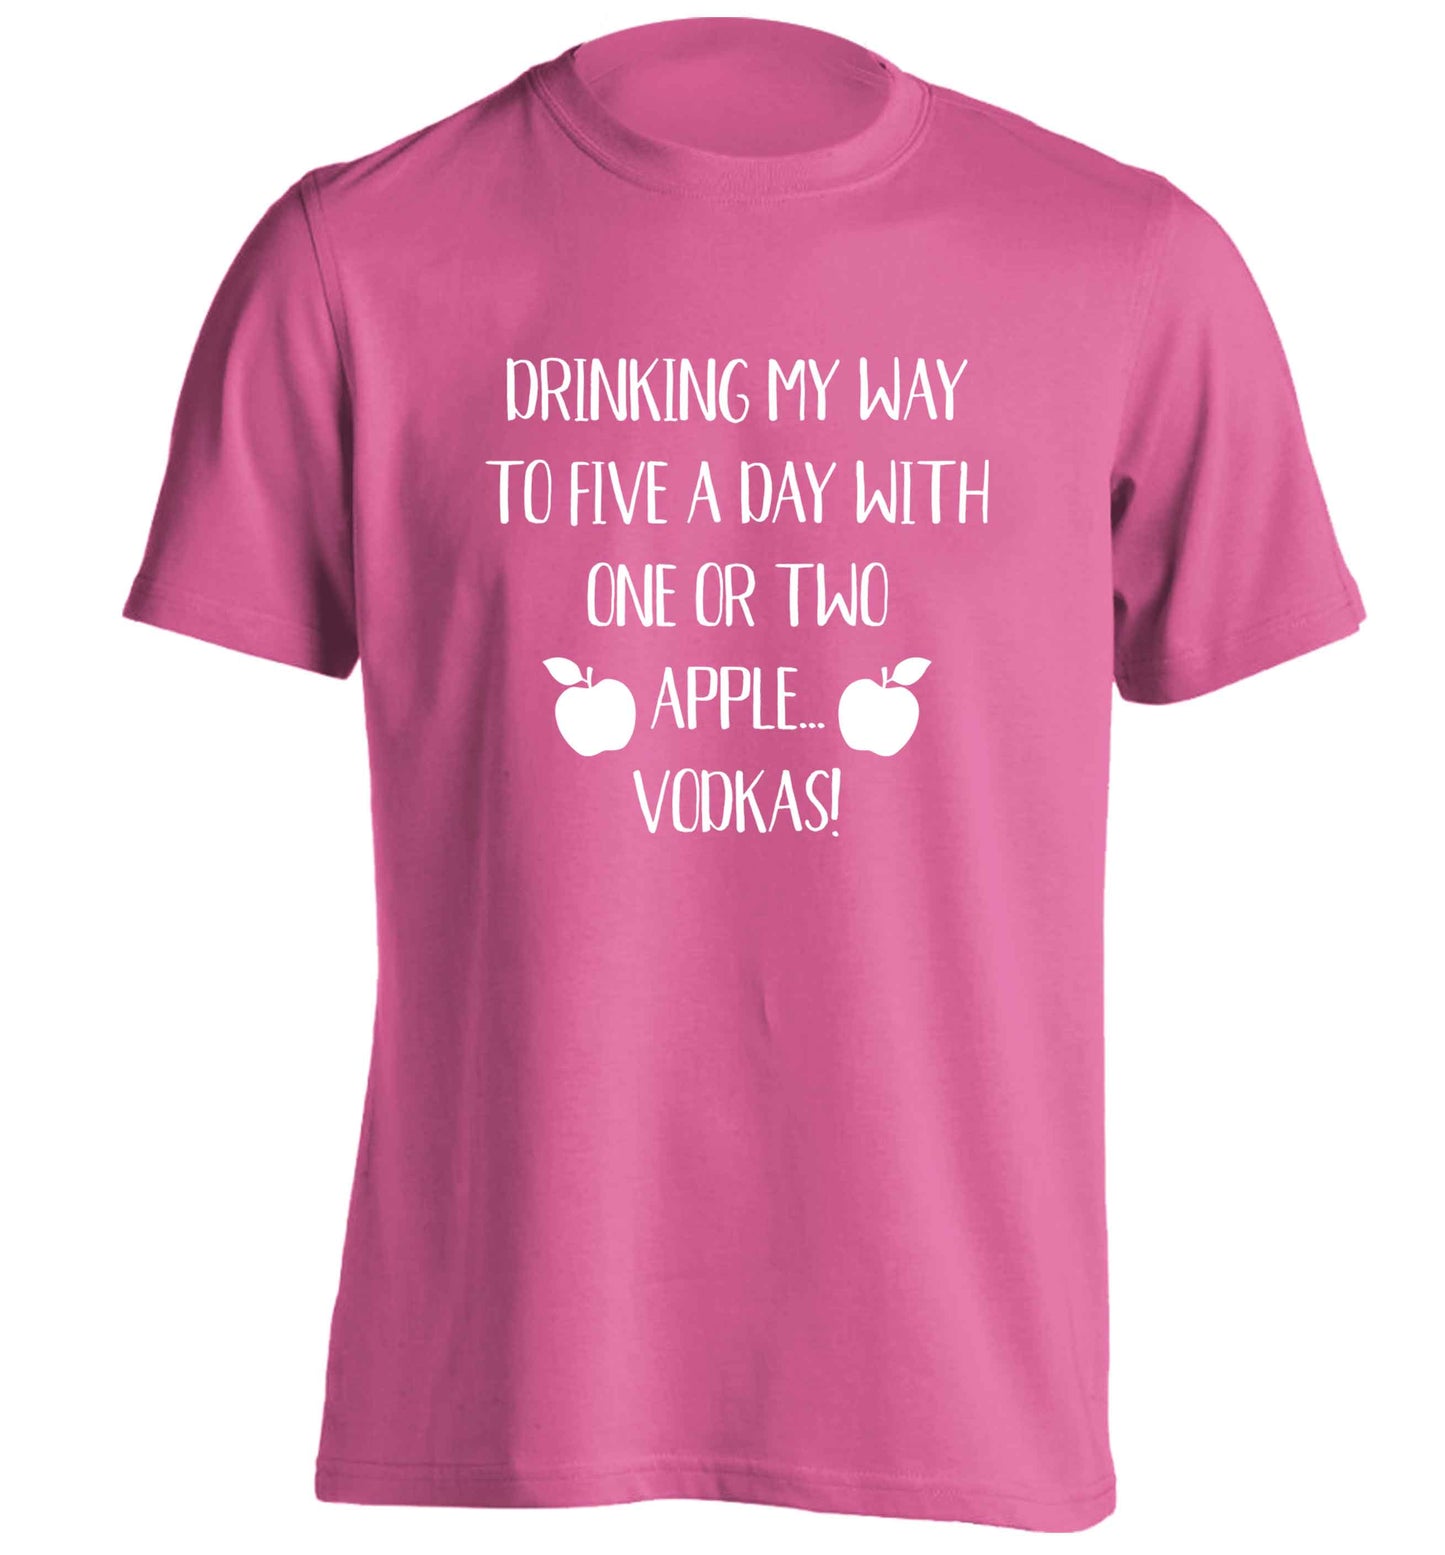 Drinking my way to five a day with one or two apple vodkas adults unisex pink Tshirt 2XL